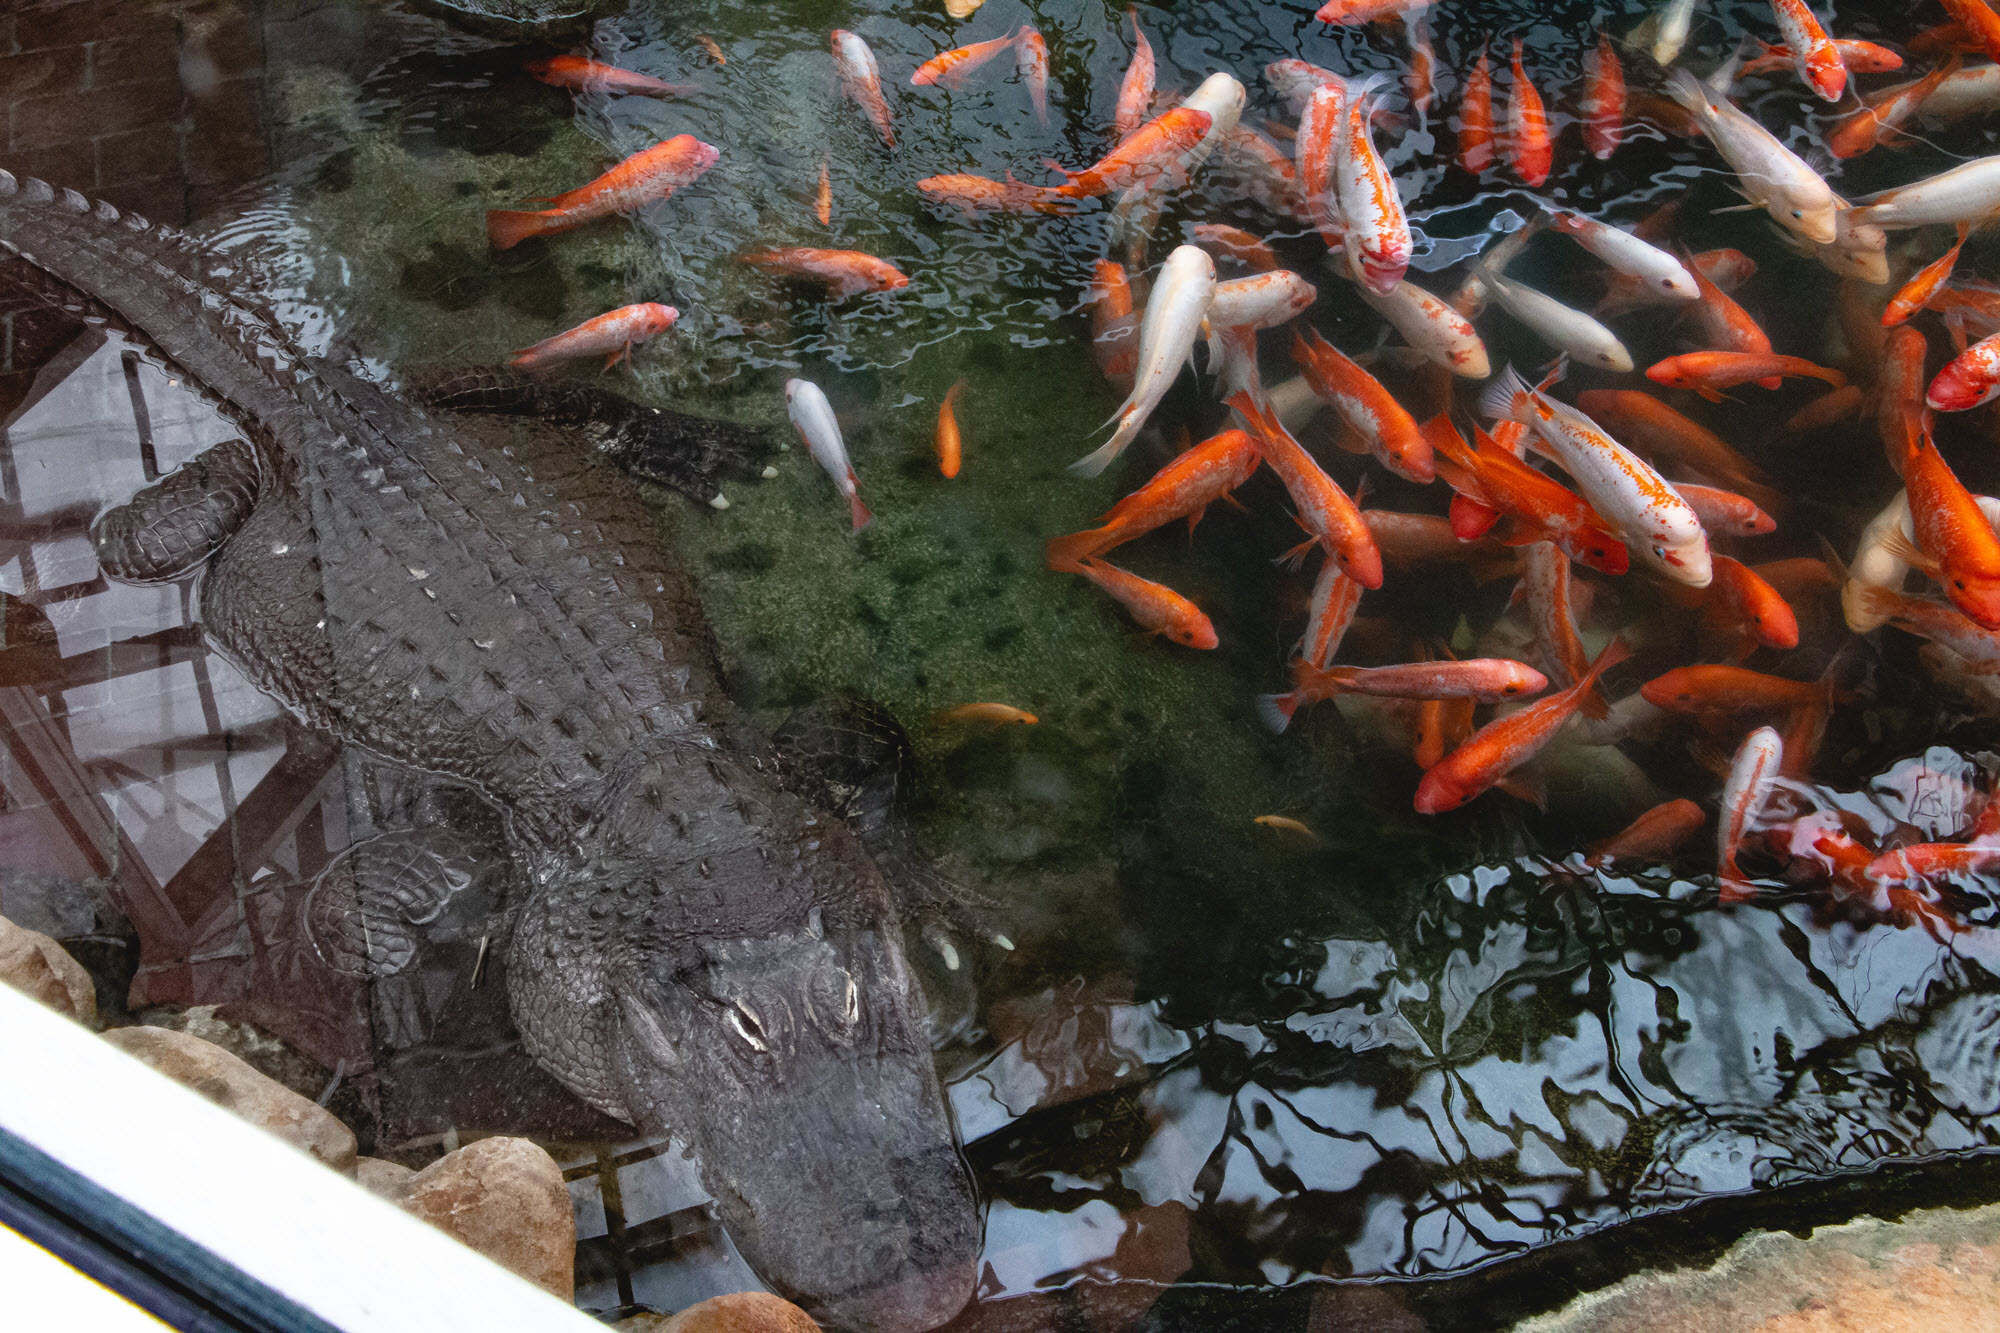 Alligator confined with coy fish at Colasanti's Tropical Gardens.